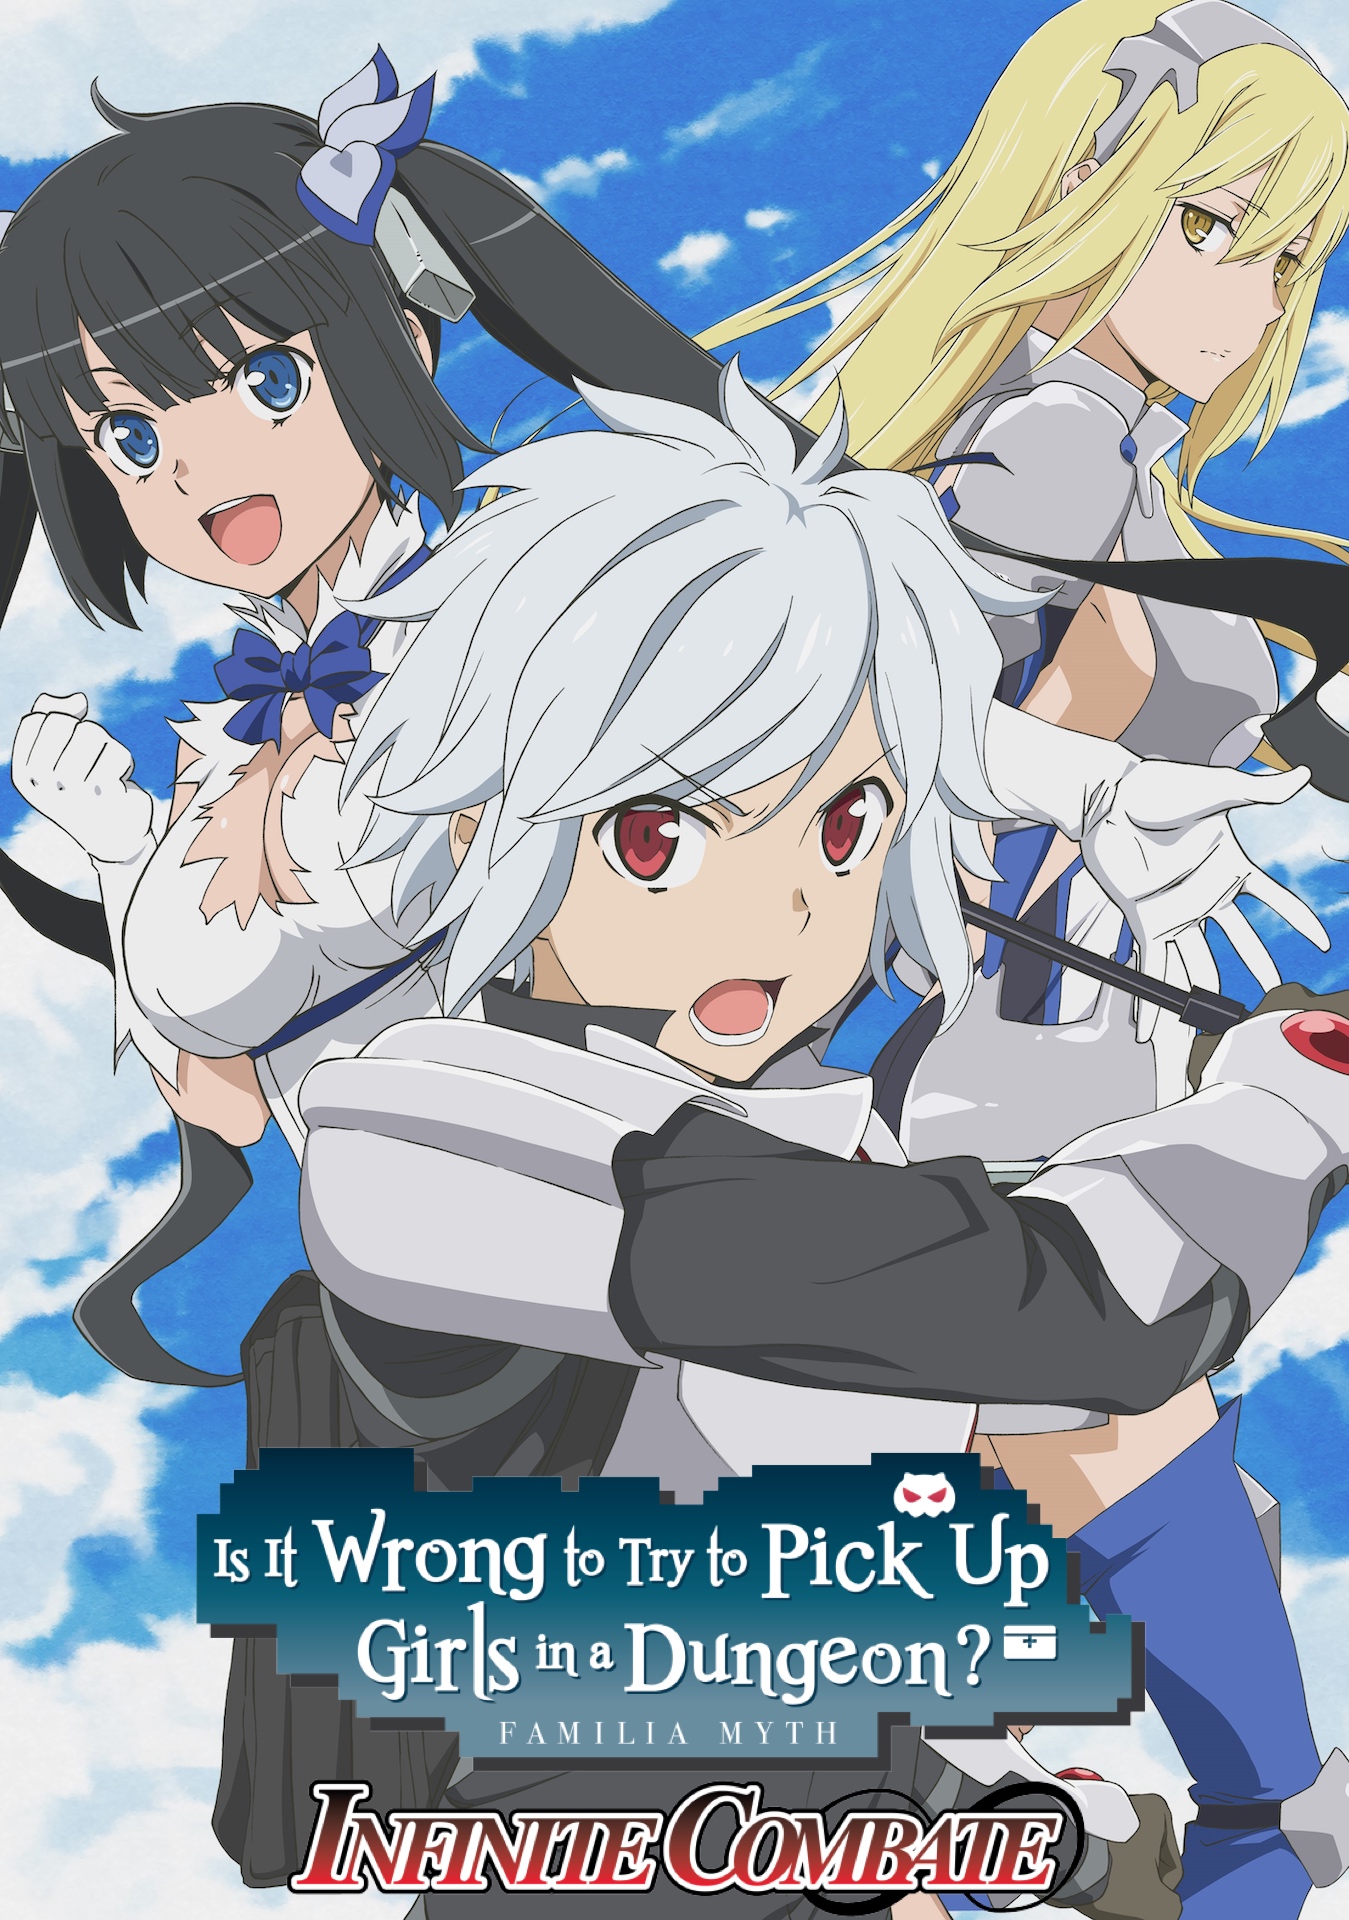 DanMachi, An Adventure I Could Care Less About